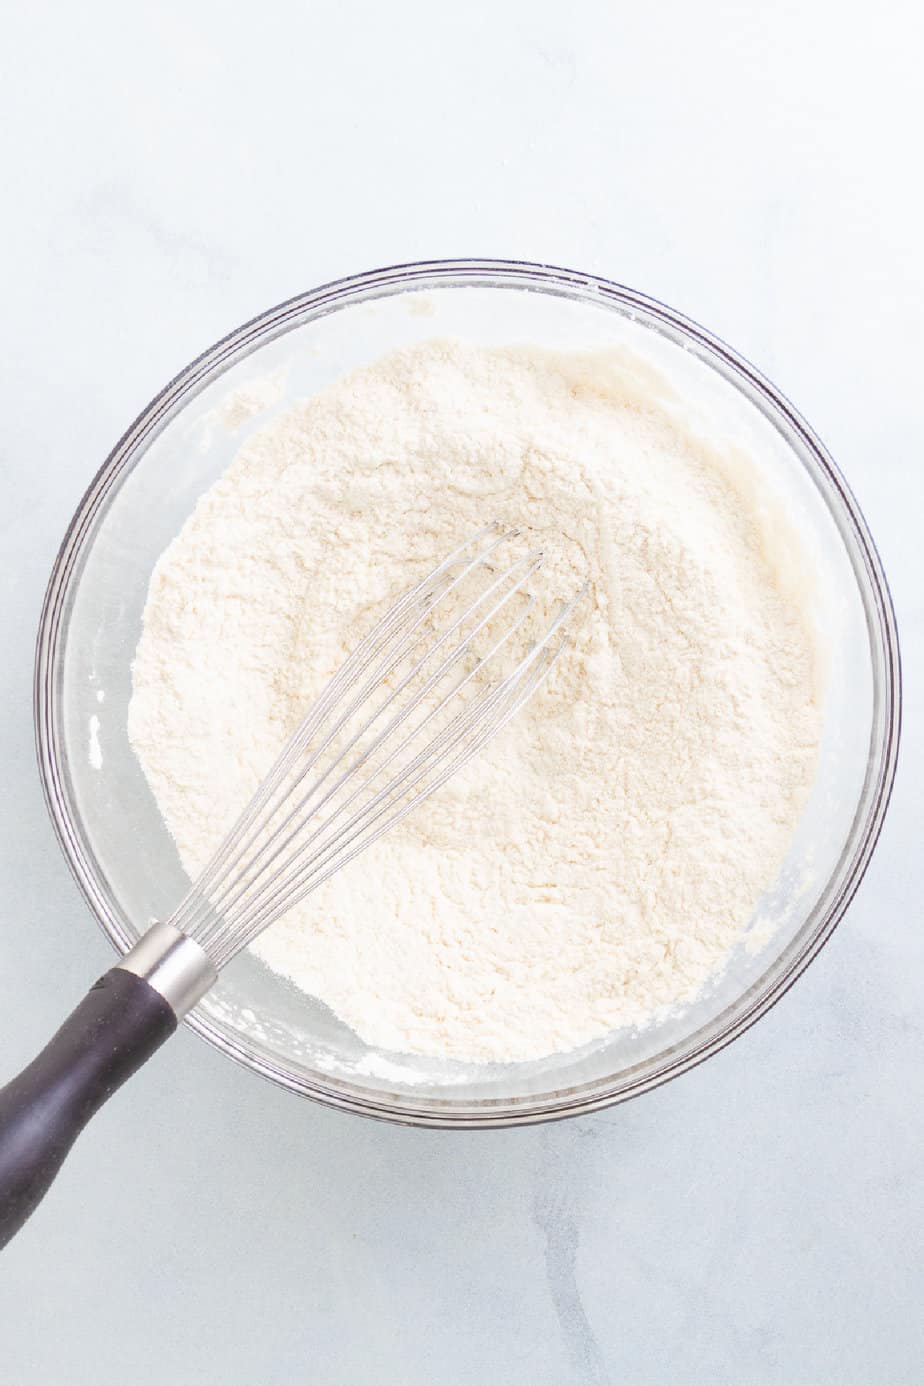 Flour and other dry ingredients in a bowl from above on a counter with a whisk mixing.